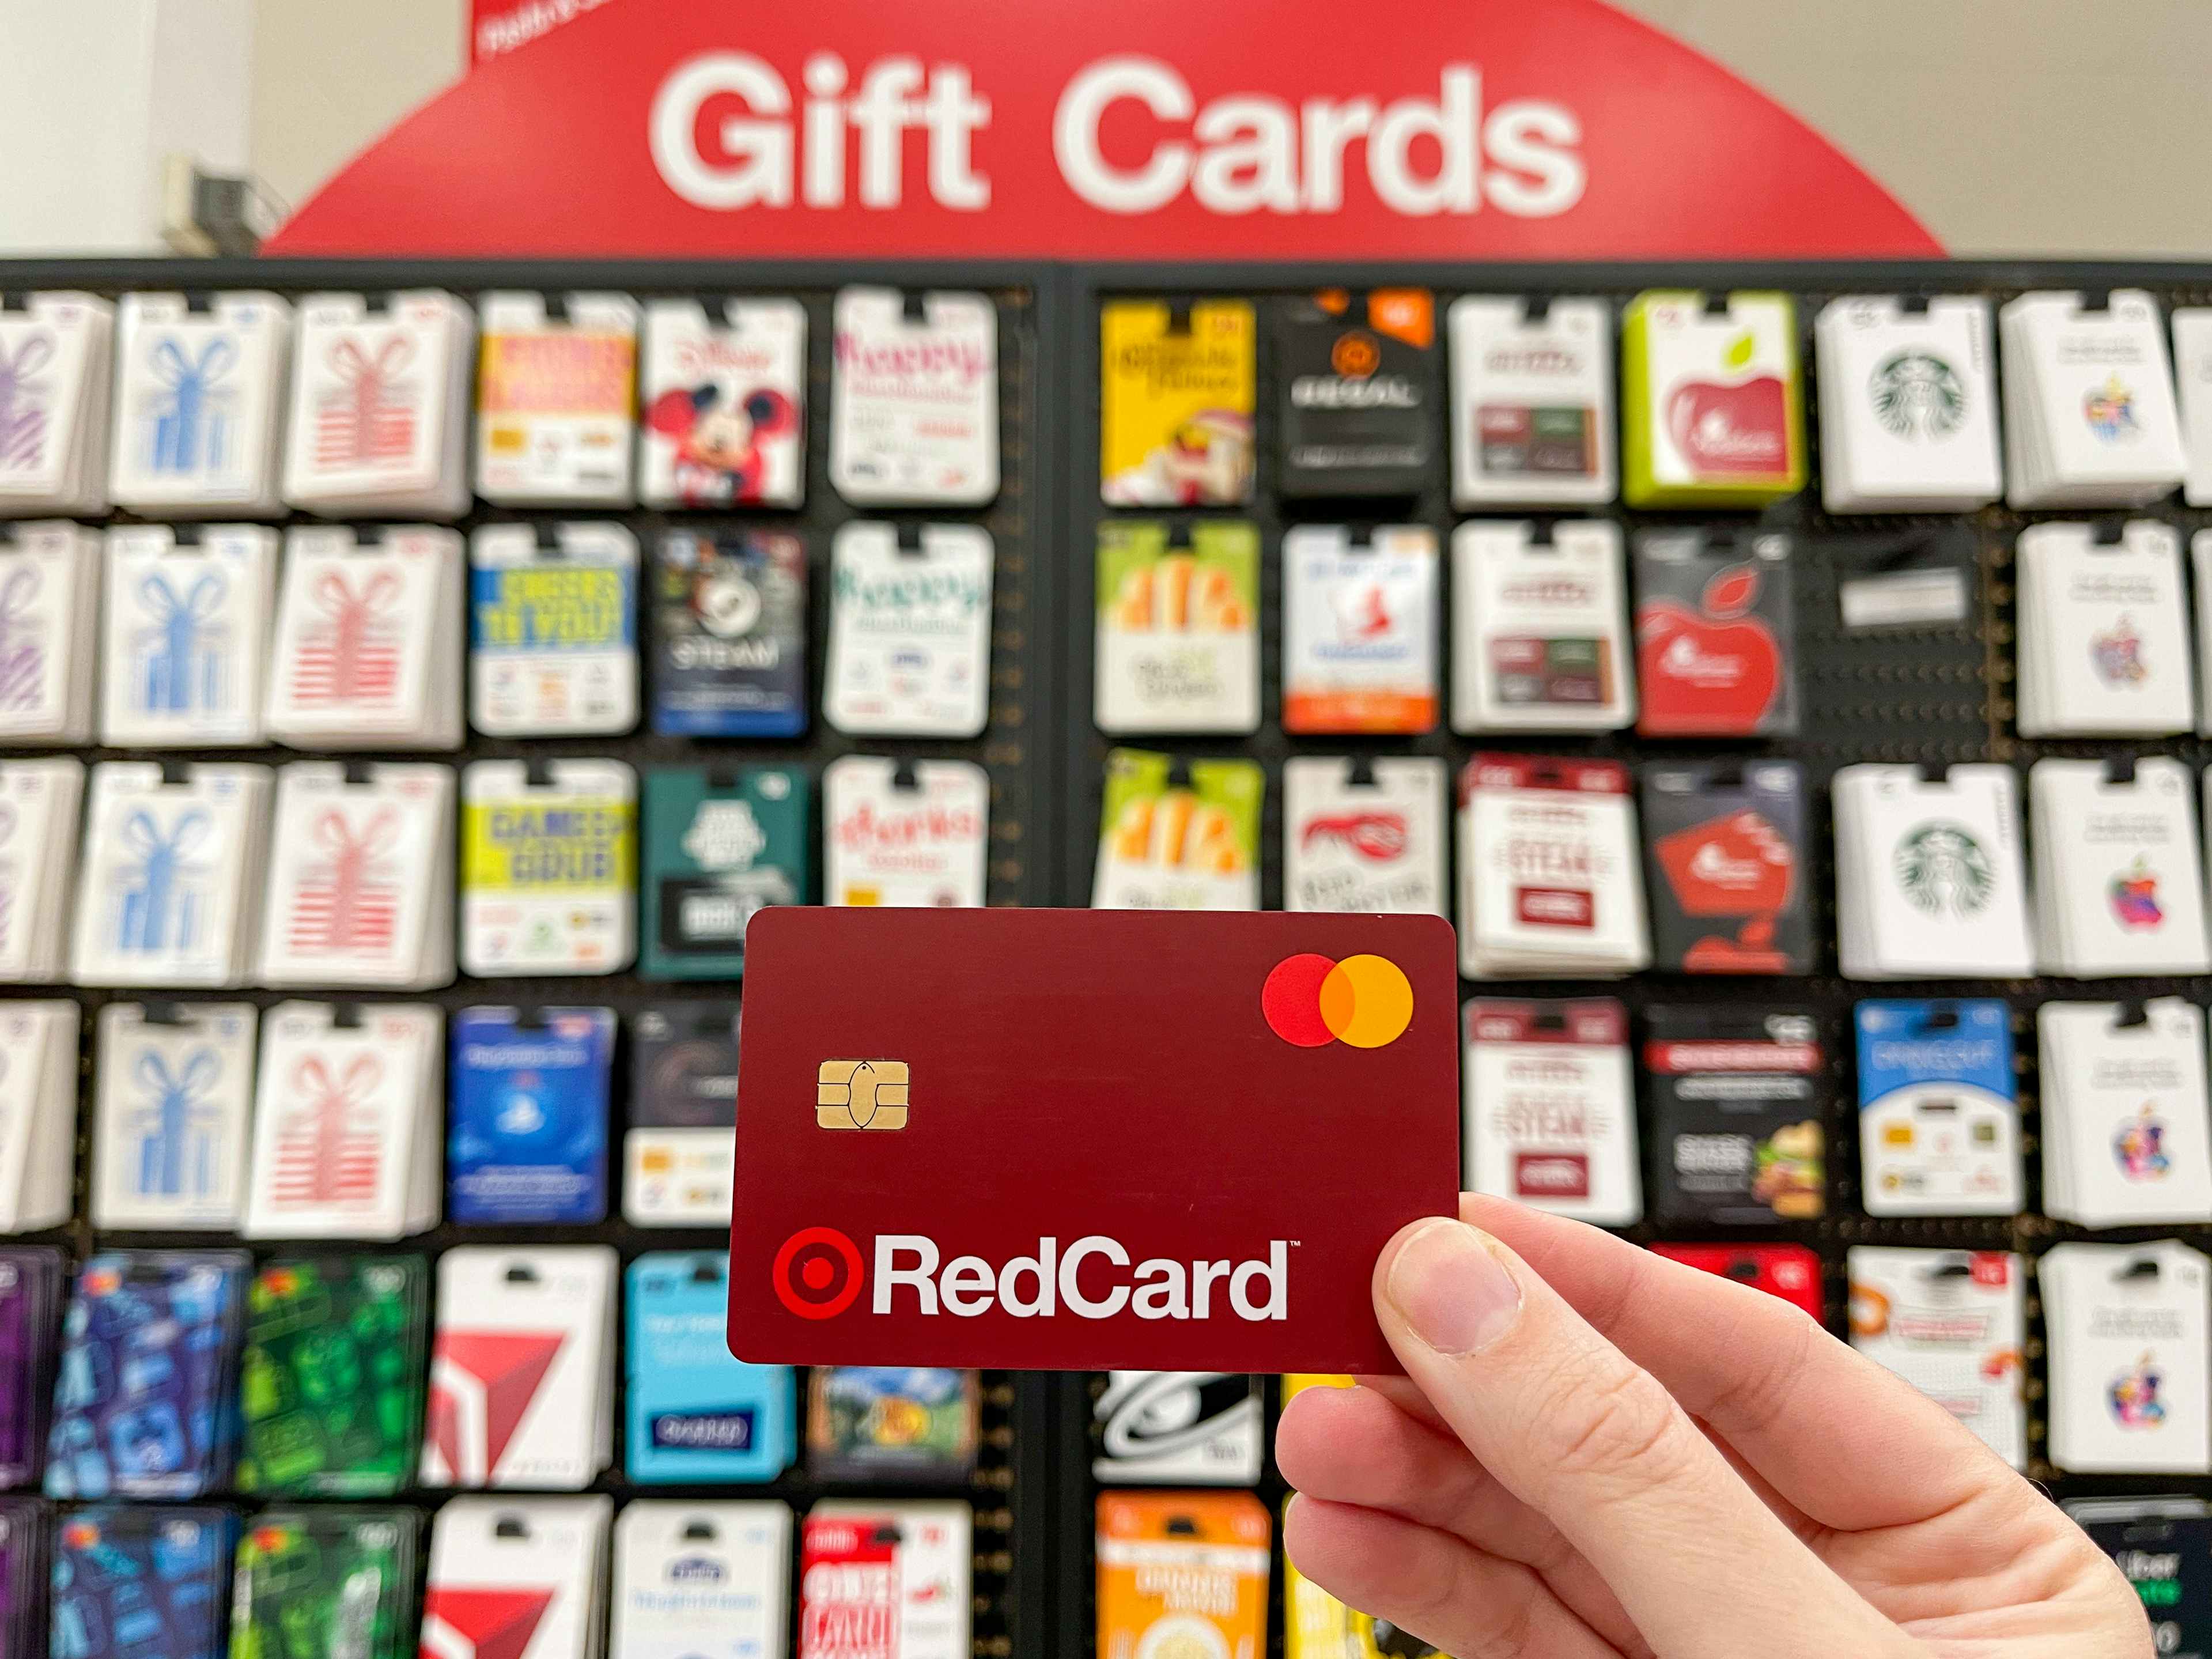 A person's hand holding their RedCard in front of wall display of gift cards for stores, restaurants, and more inside a Target.